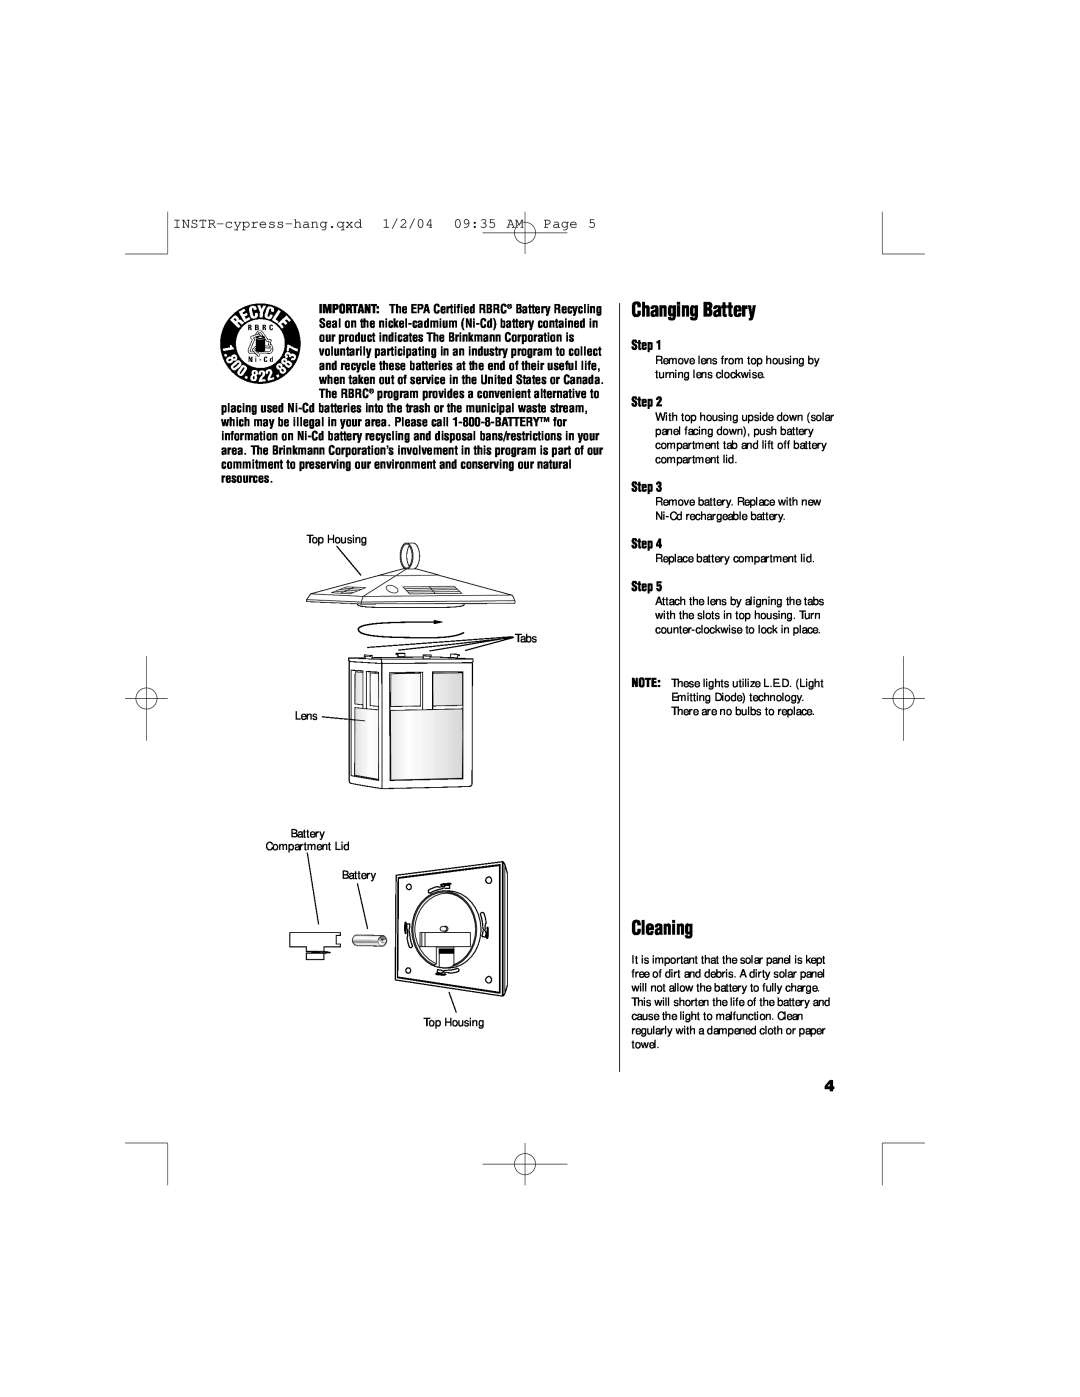 Brinkmann 822-1526-2 owner manual Changing Battery, Cleaning, INSTR-cypress-hang.qxd1/2/04 09 35 AM Page, Step 